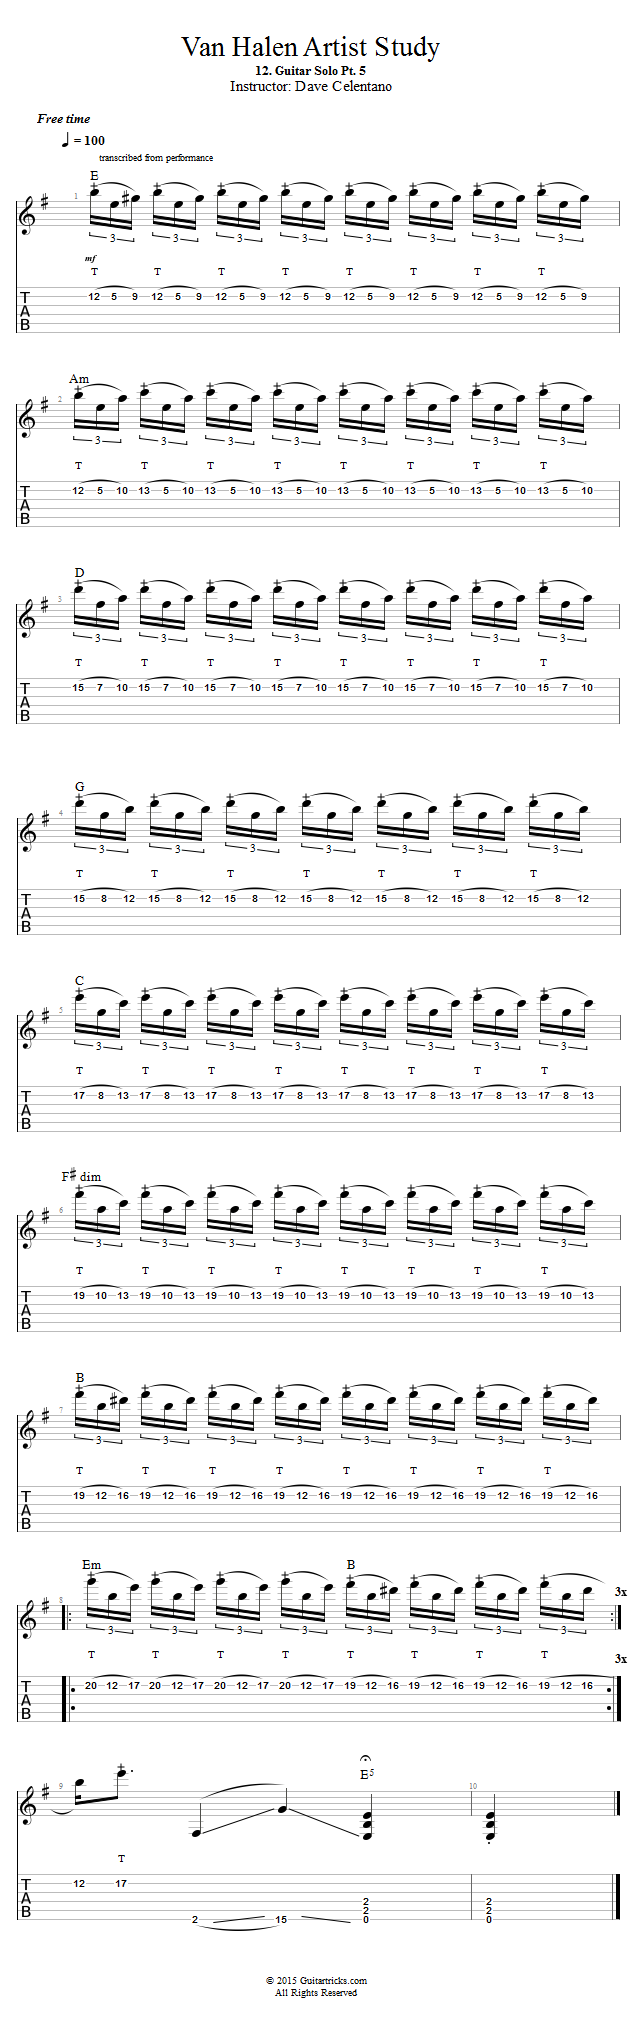 Guitar Solo Pt. 5 song notation